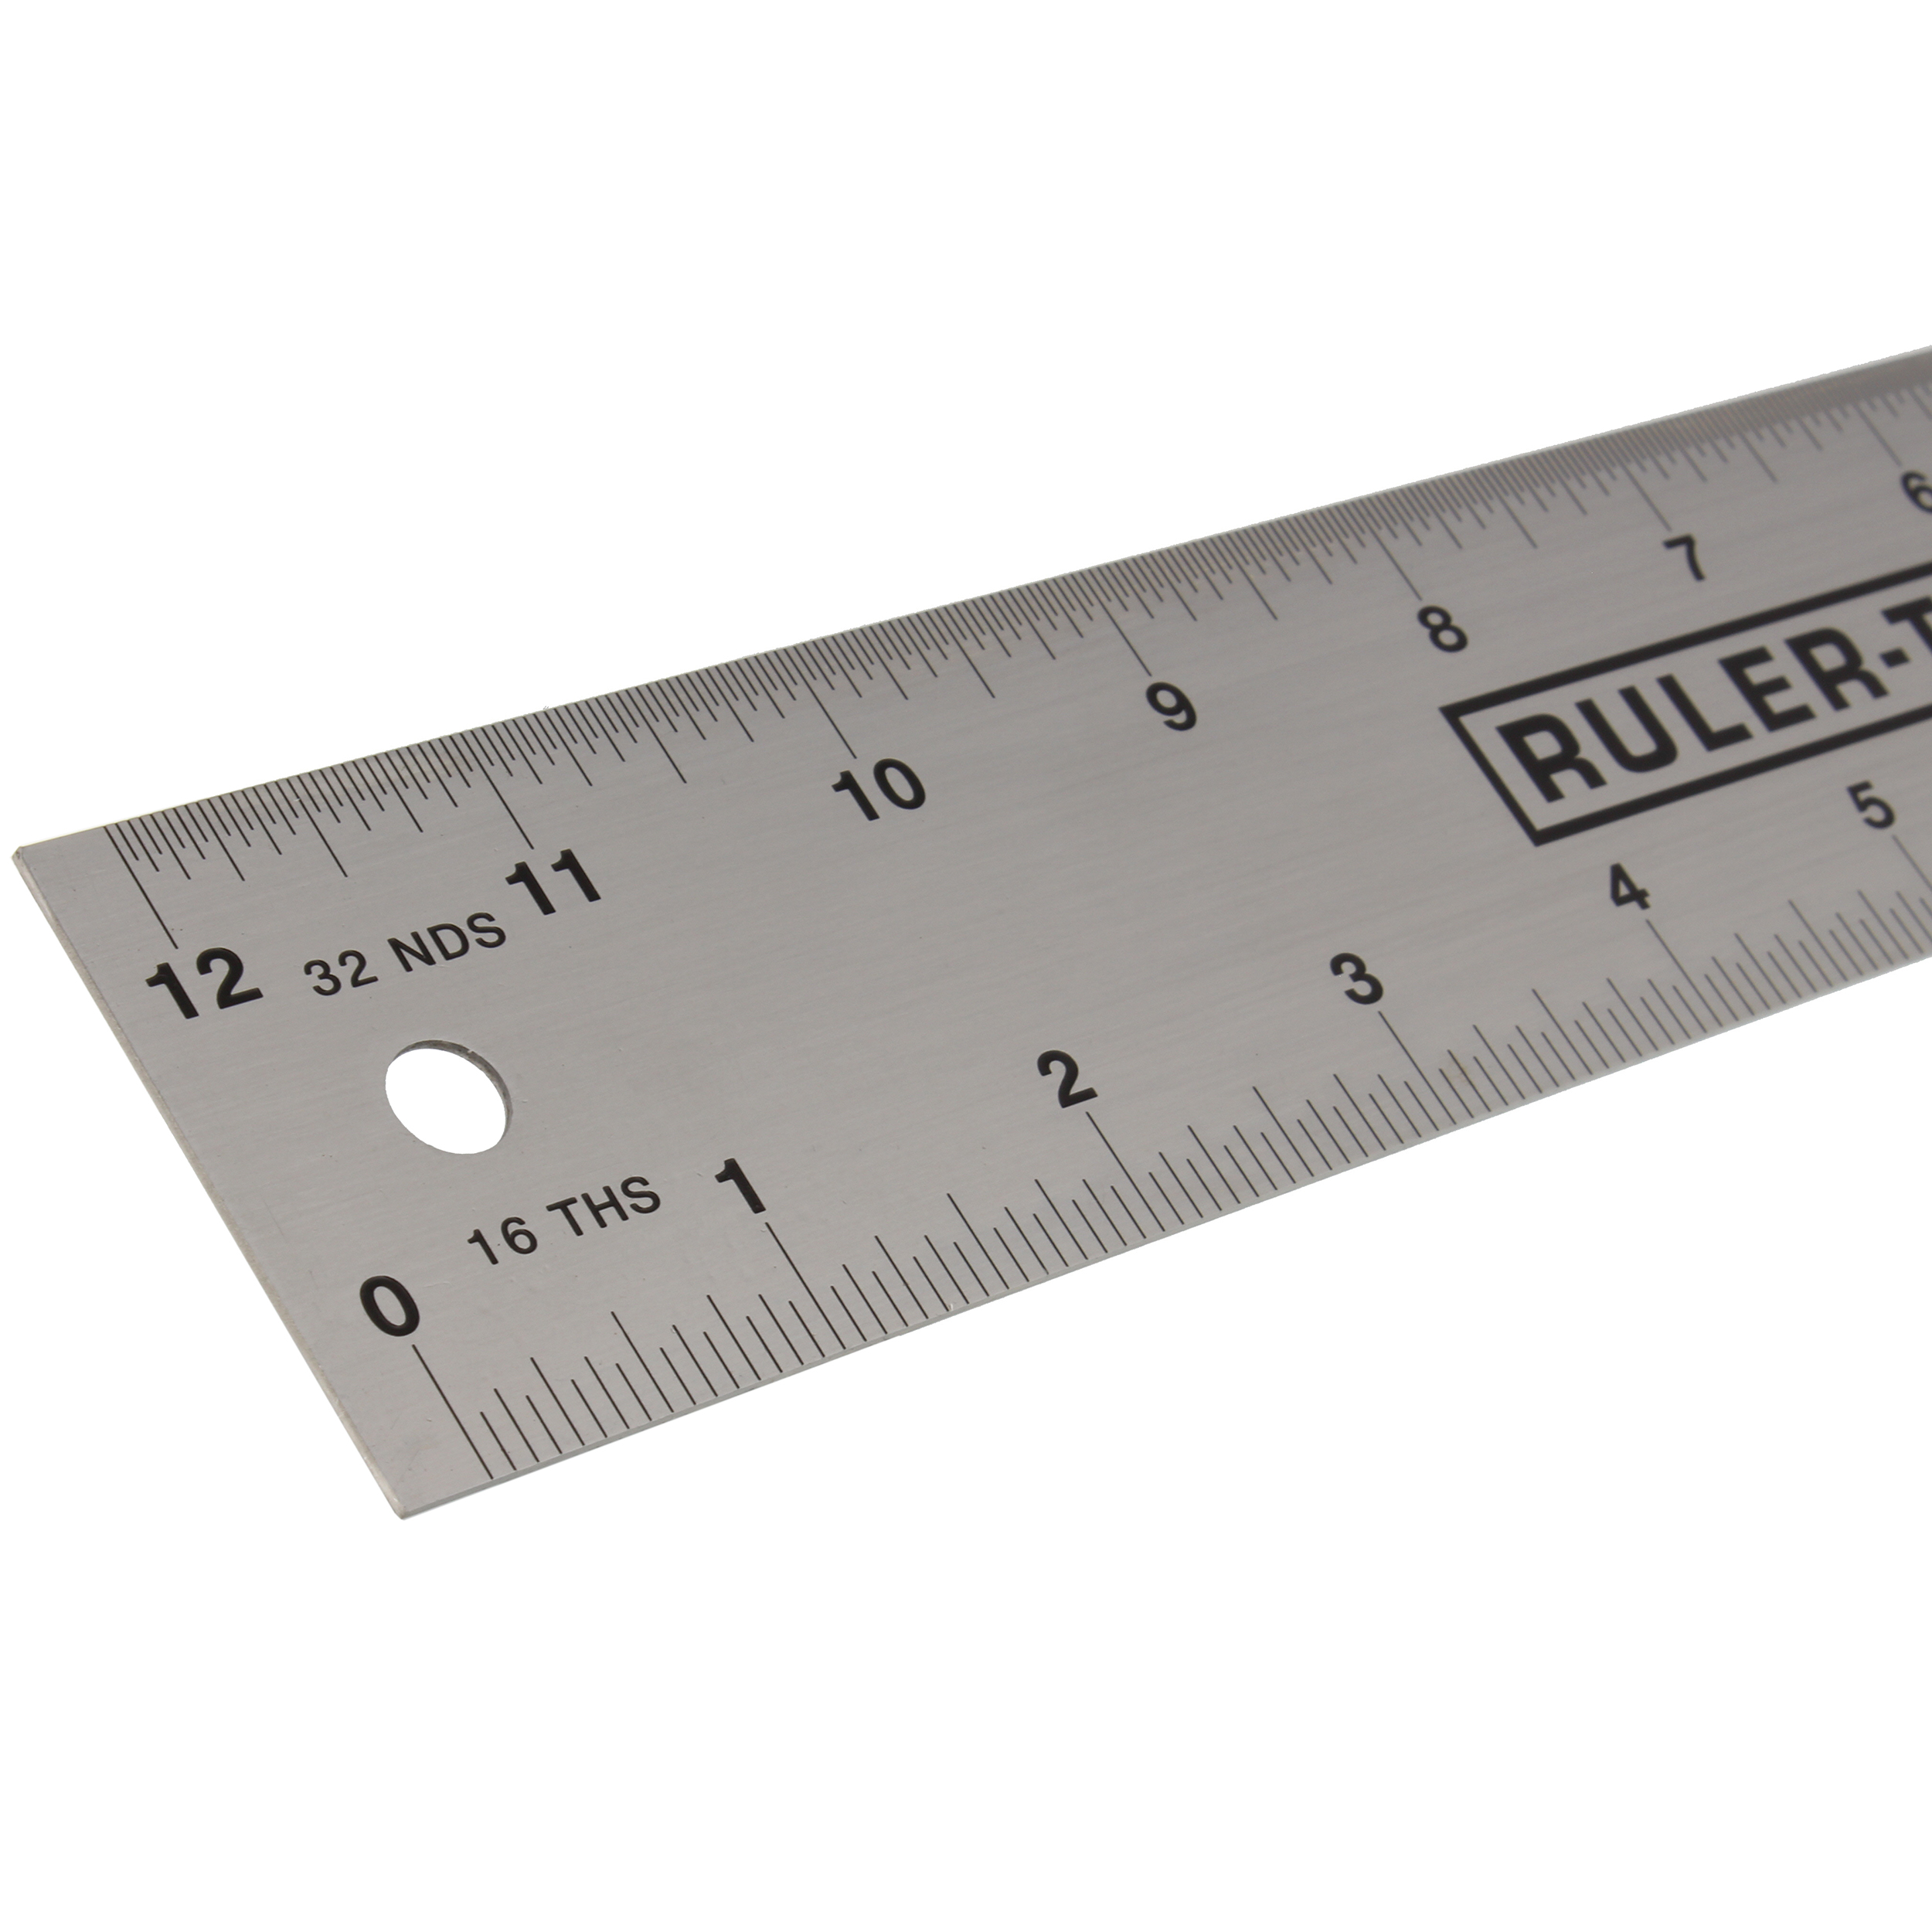 DCT Centering Ruler 24” Inch Woodworking or Embroidery Center Finding  Measurer 